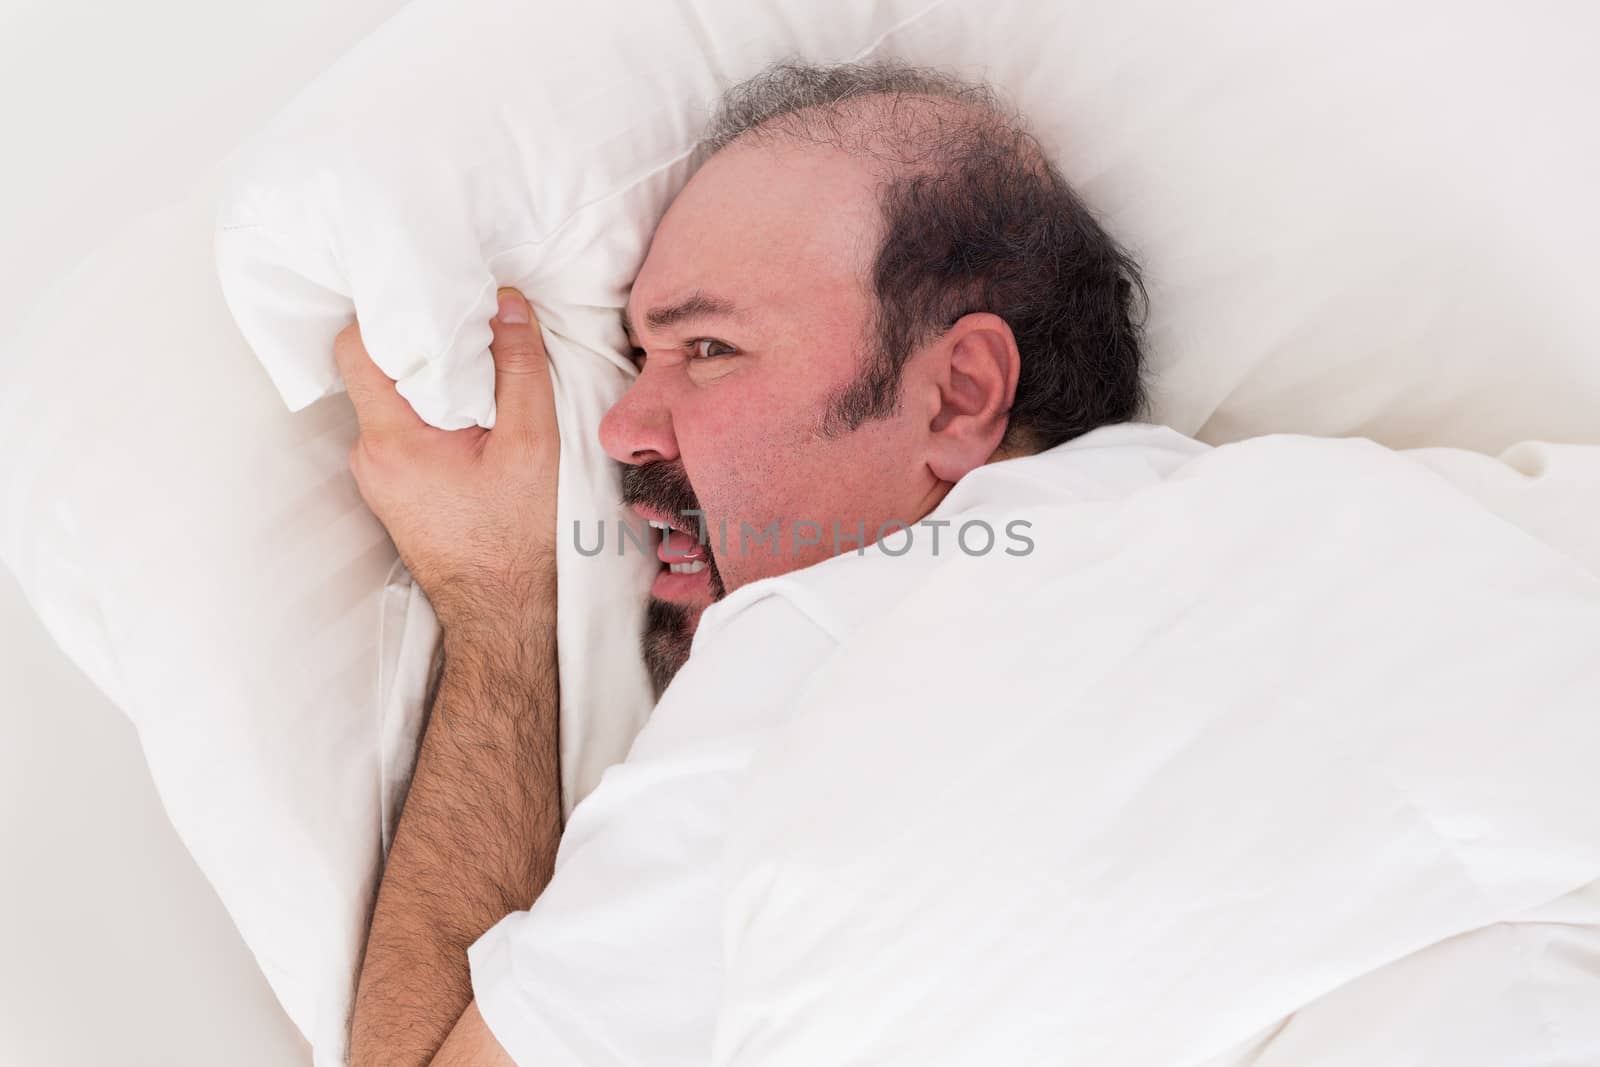 Insomniac clutching at his pillow in desperation as he balefully refuses to get up in the morning after a sleepless night